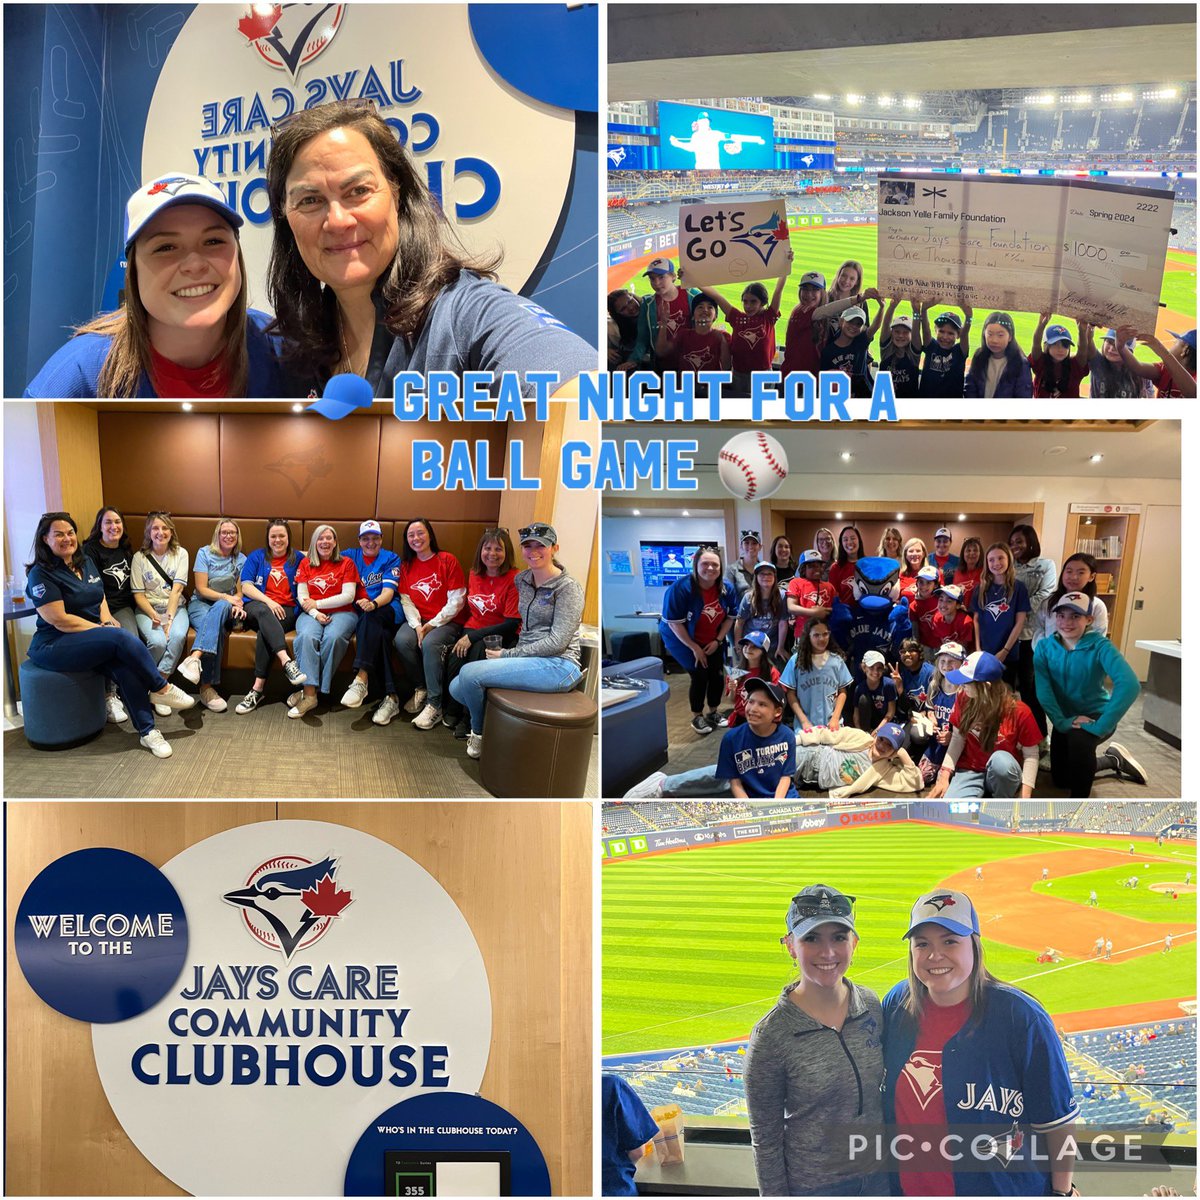 Thank you to @MissArthurCYC for organizing a great night! To see, hear and feel the excitement from the “Avengers” Girls at Bat team was amazing❣️Thank you @JaysCare @HCDSB @HCDSB_CYCs @St_Andrew145 @GBrown64 @BlueJays Way to go Jays ⚾️ 5-3👏